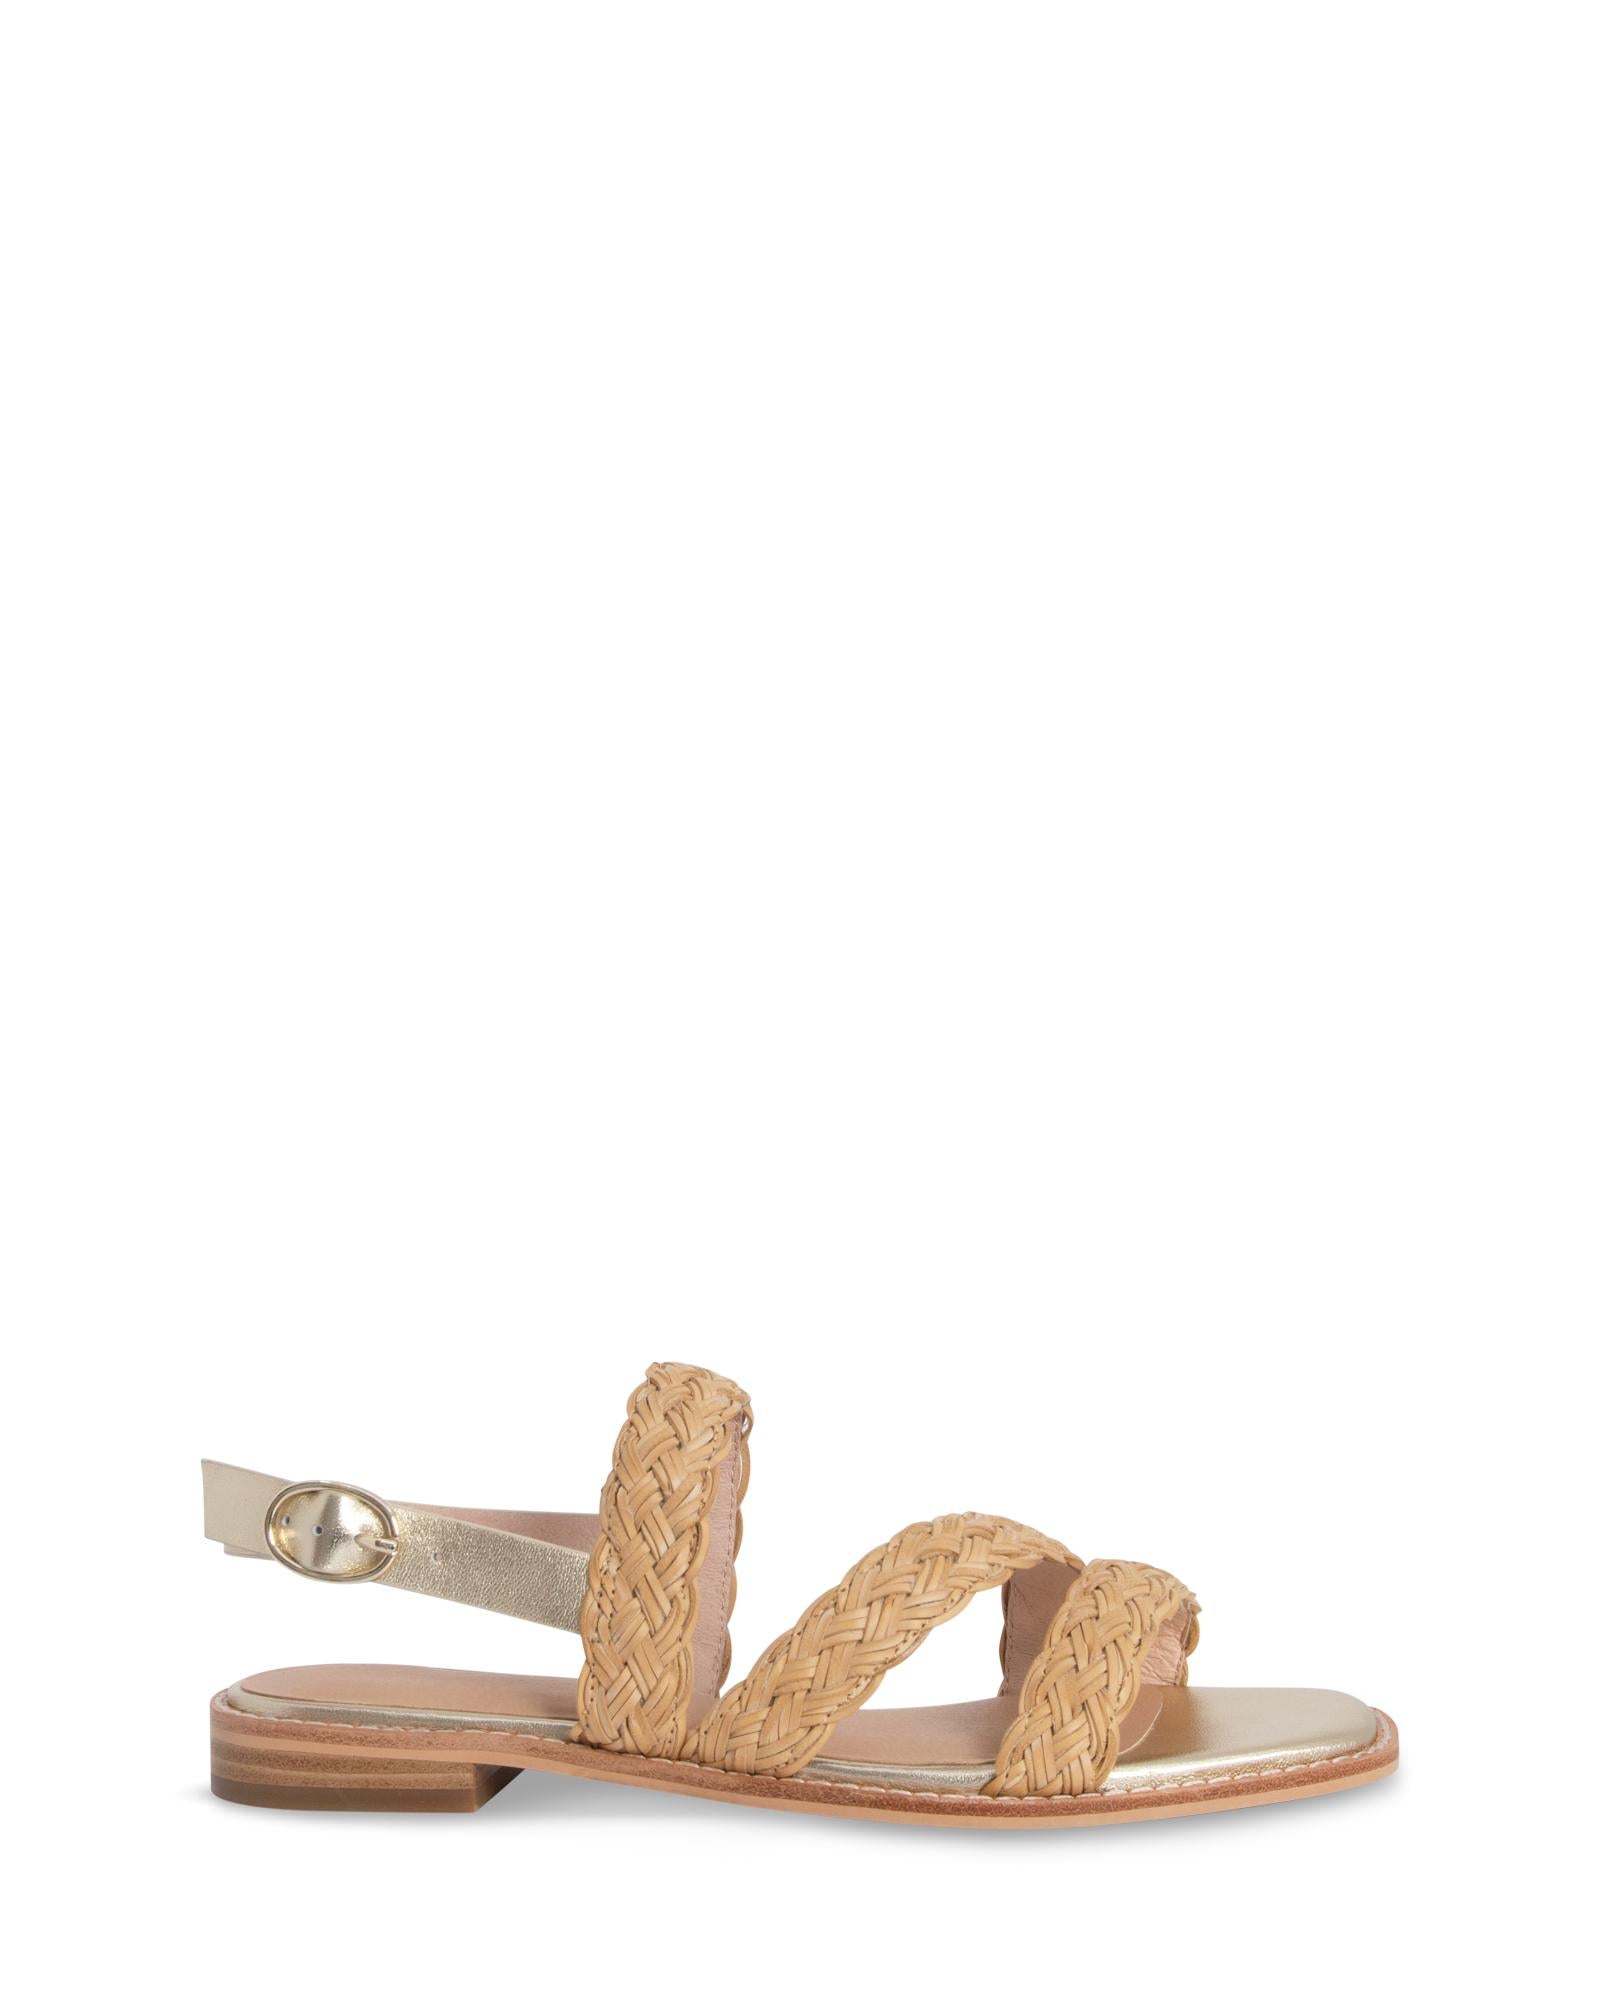 Emmy Gold 1cm Sandal with Woven Straps and Adjustable Ankle Strap 